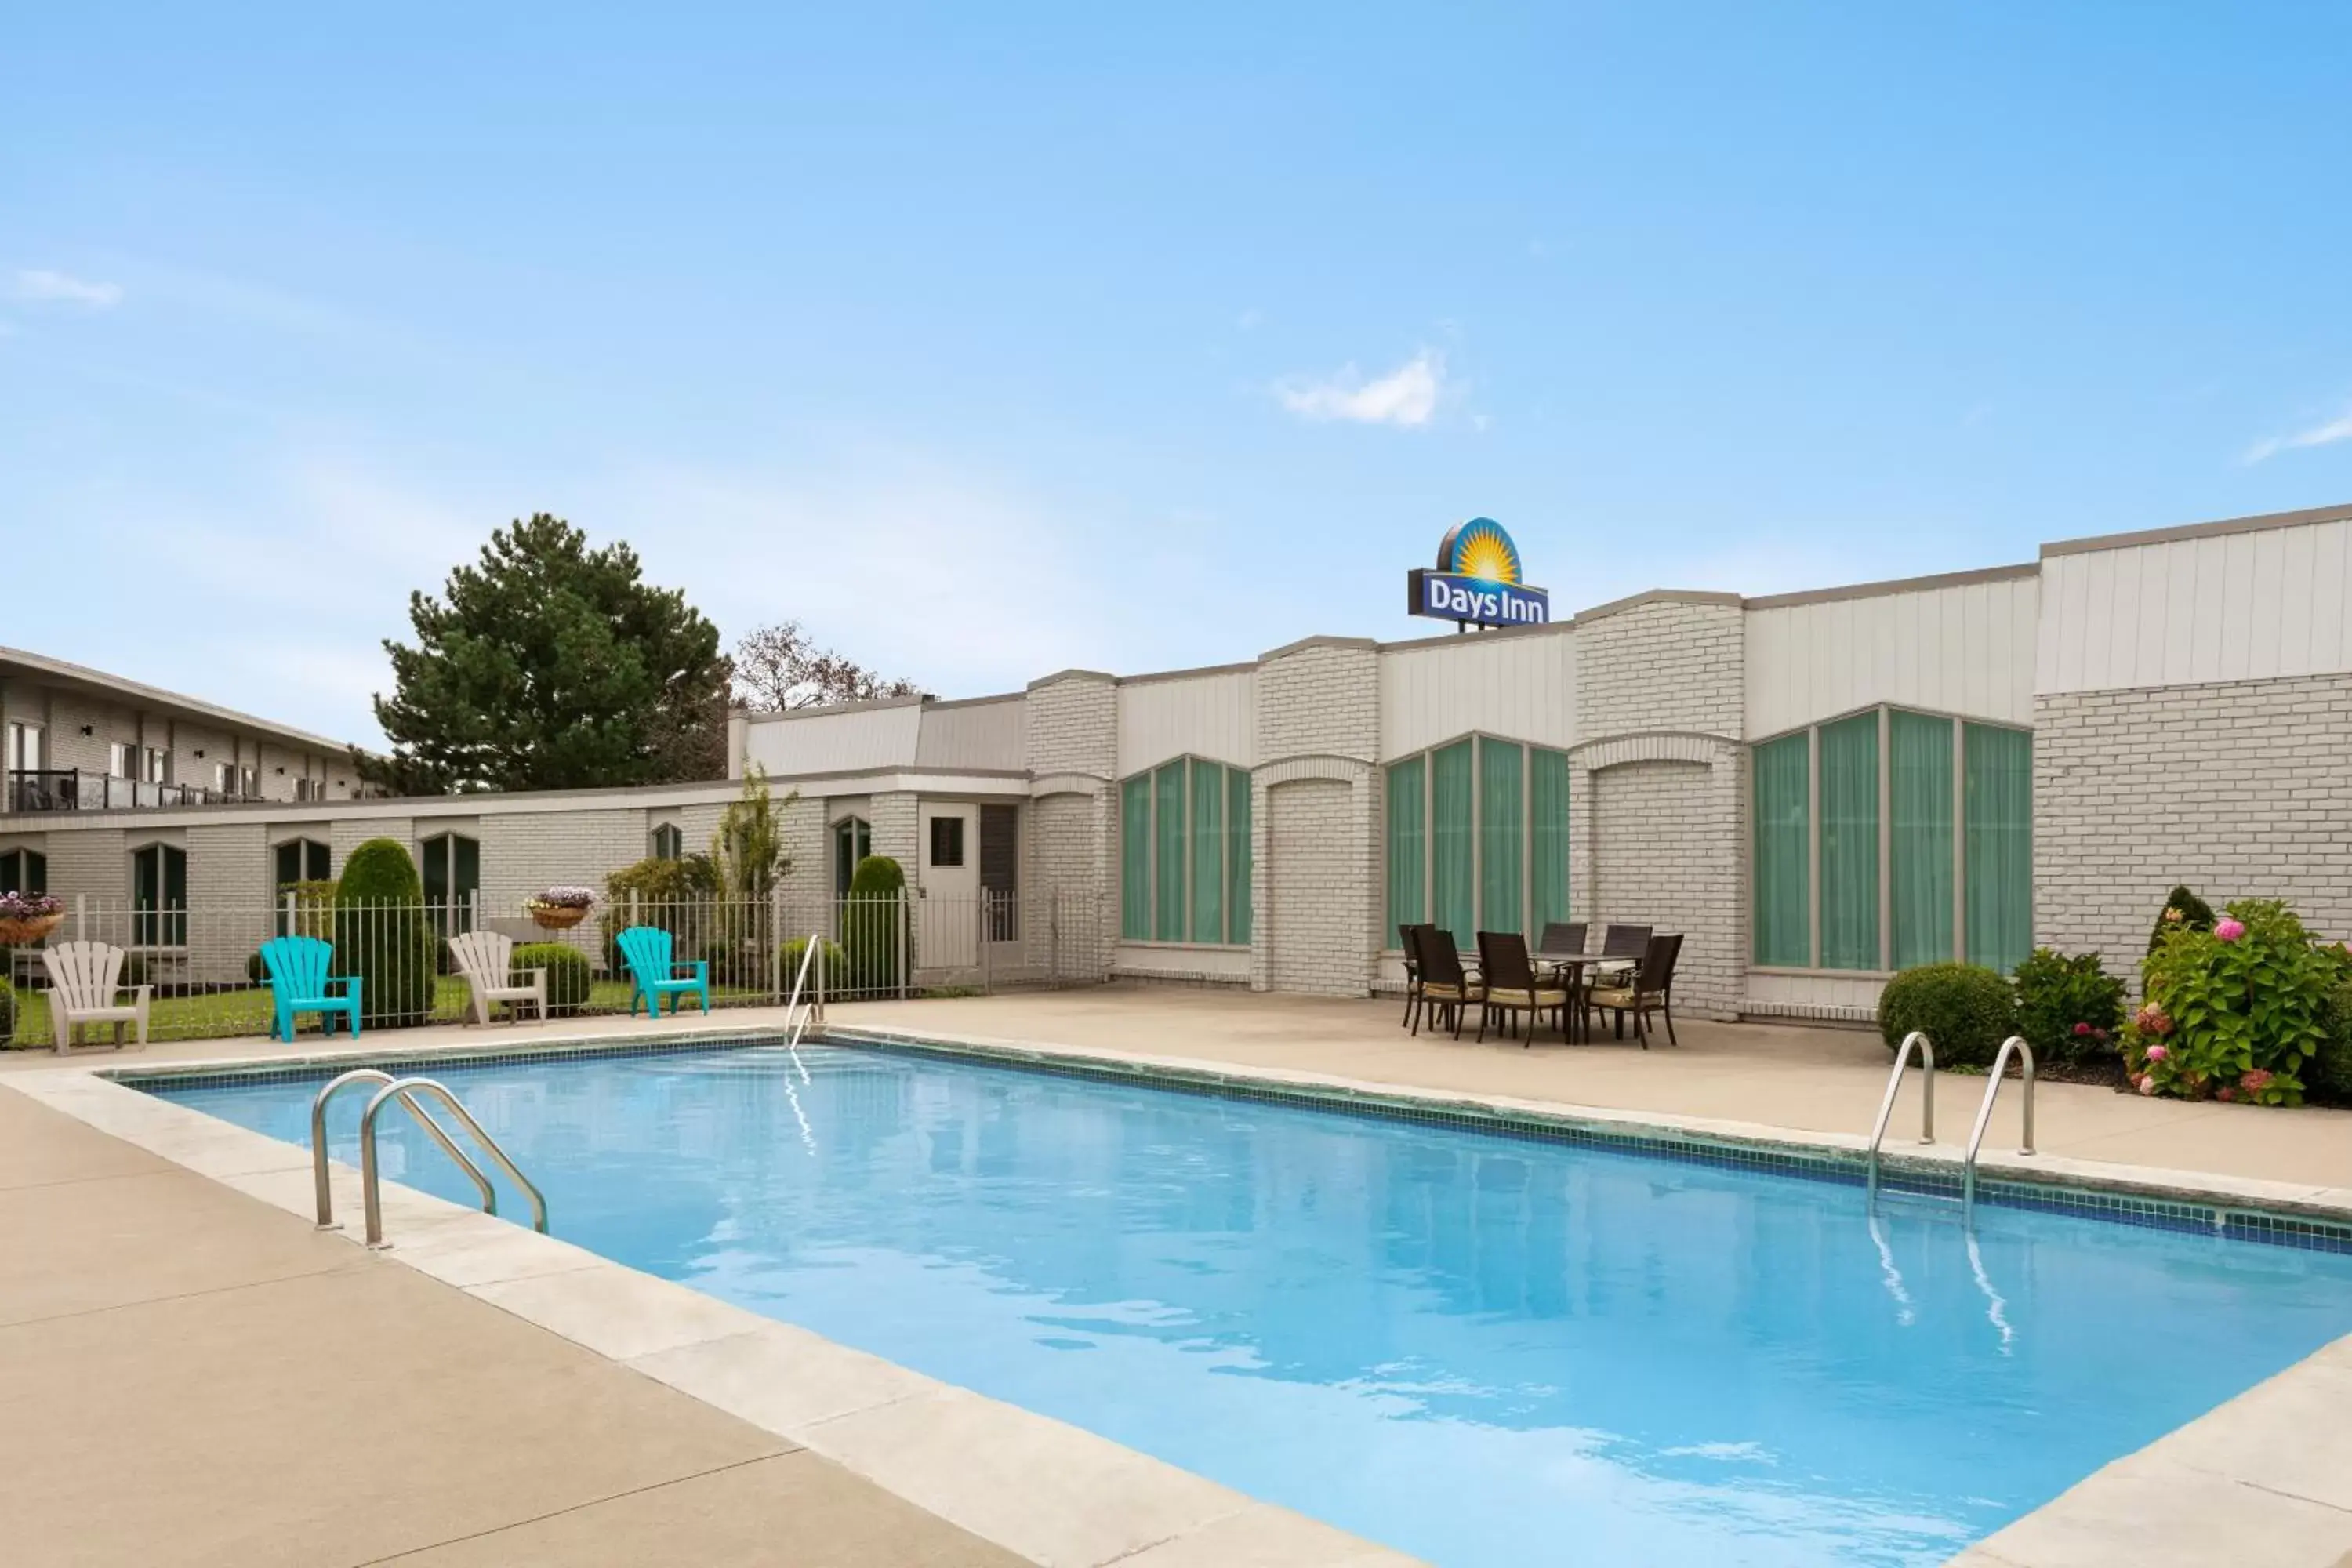 Swimming pool, Property Building in Days Inn by Wyndham London